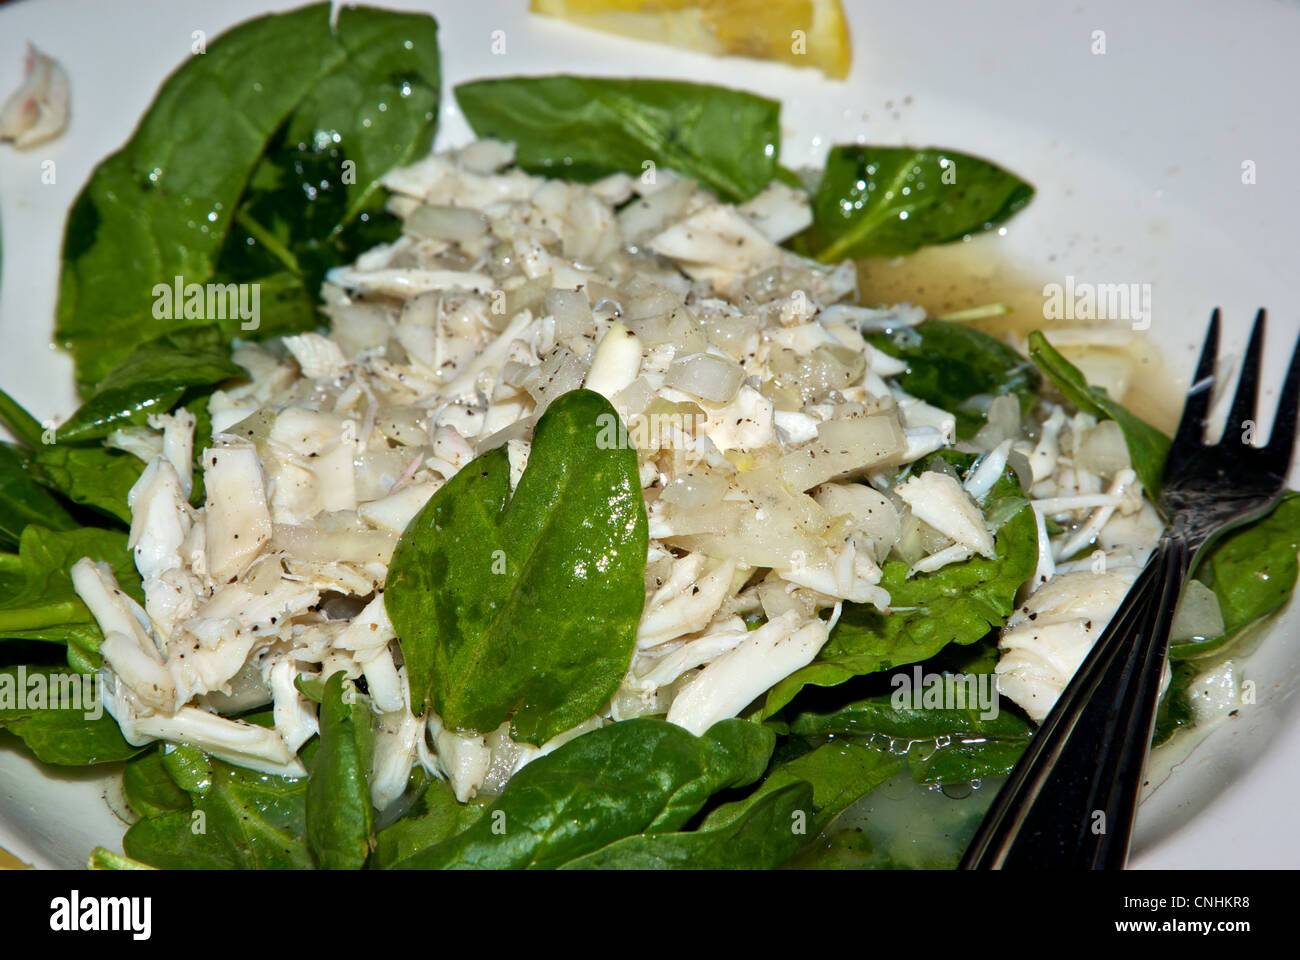 West Indies salad crabmeat diced raw onions bed baby leaf spinach pepper flakes Alabama seafood dish Stock Photo